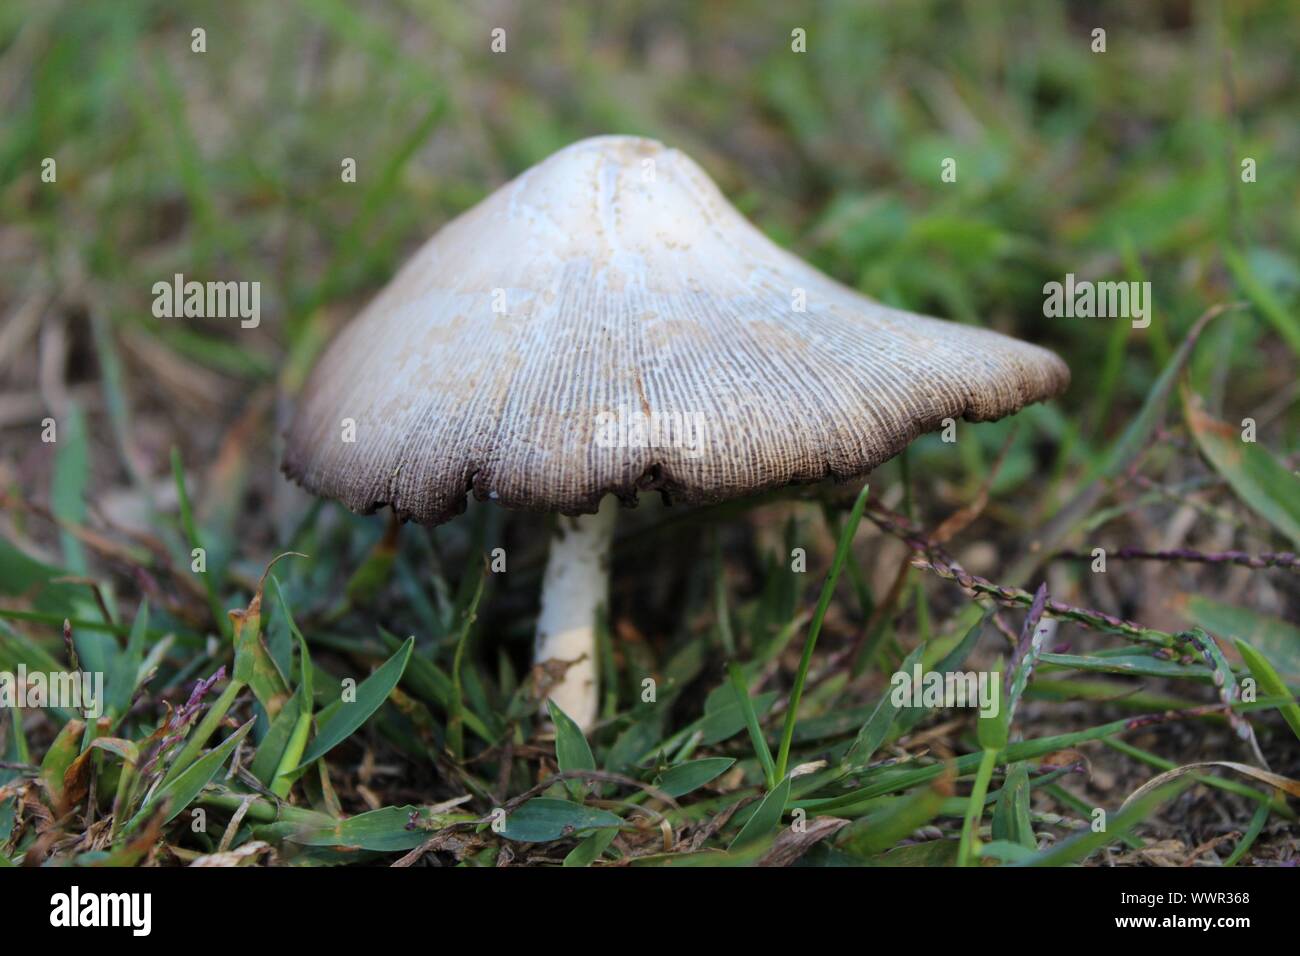 A Fairy Toadstool In The Grass Stock Photo